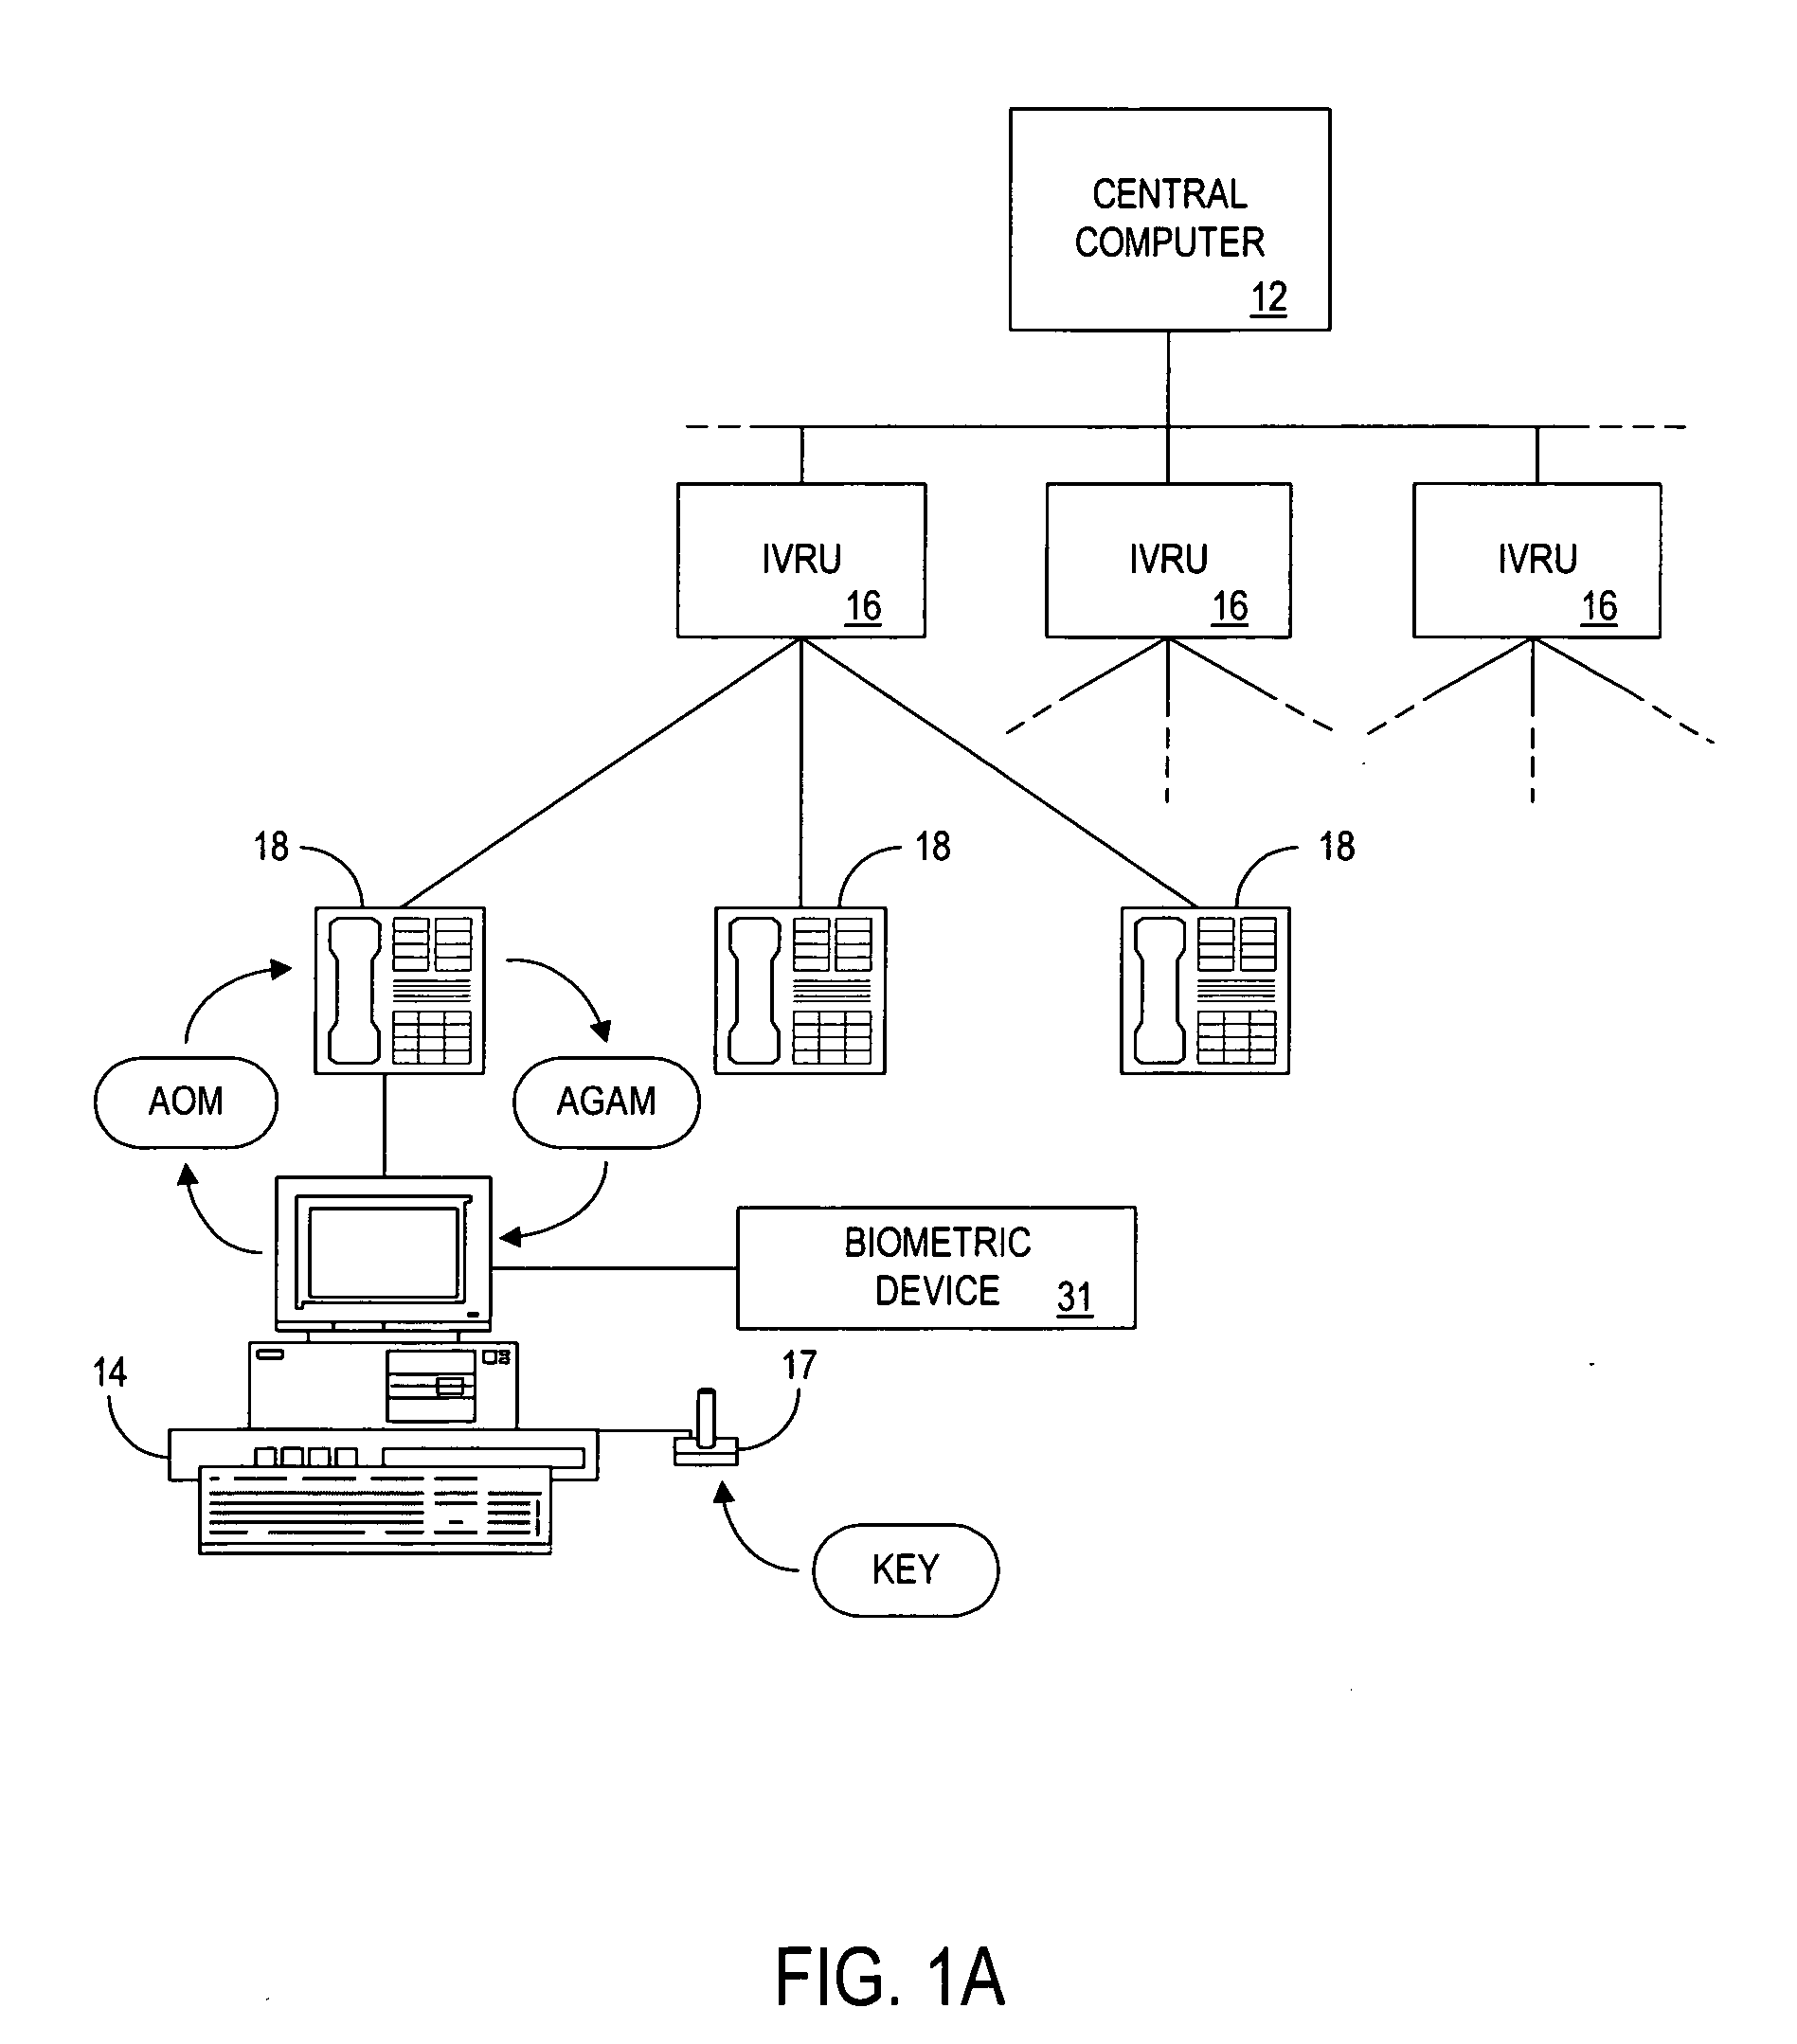 Methods and apparatus for awarding prizes based on authentication of computer generated outcomes using coupons